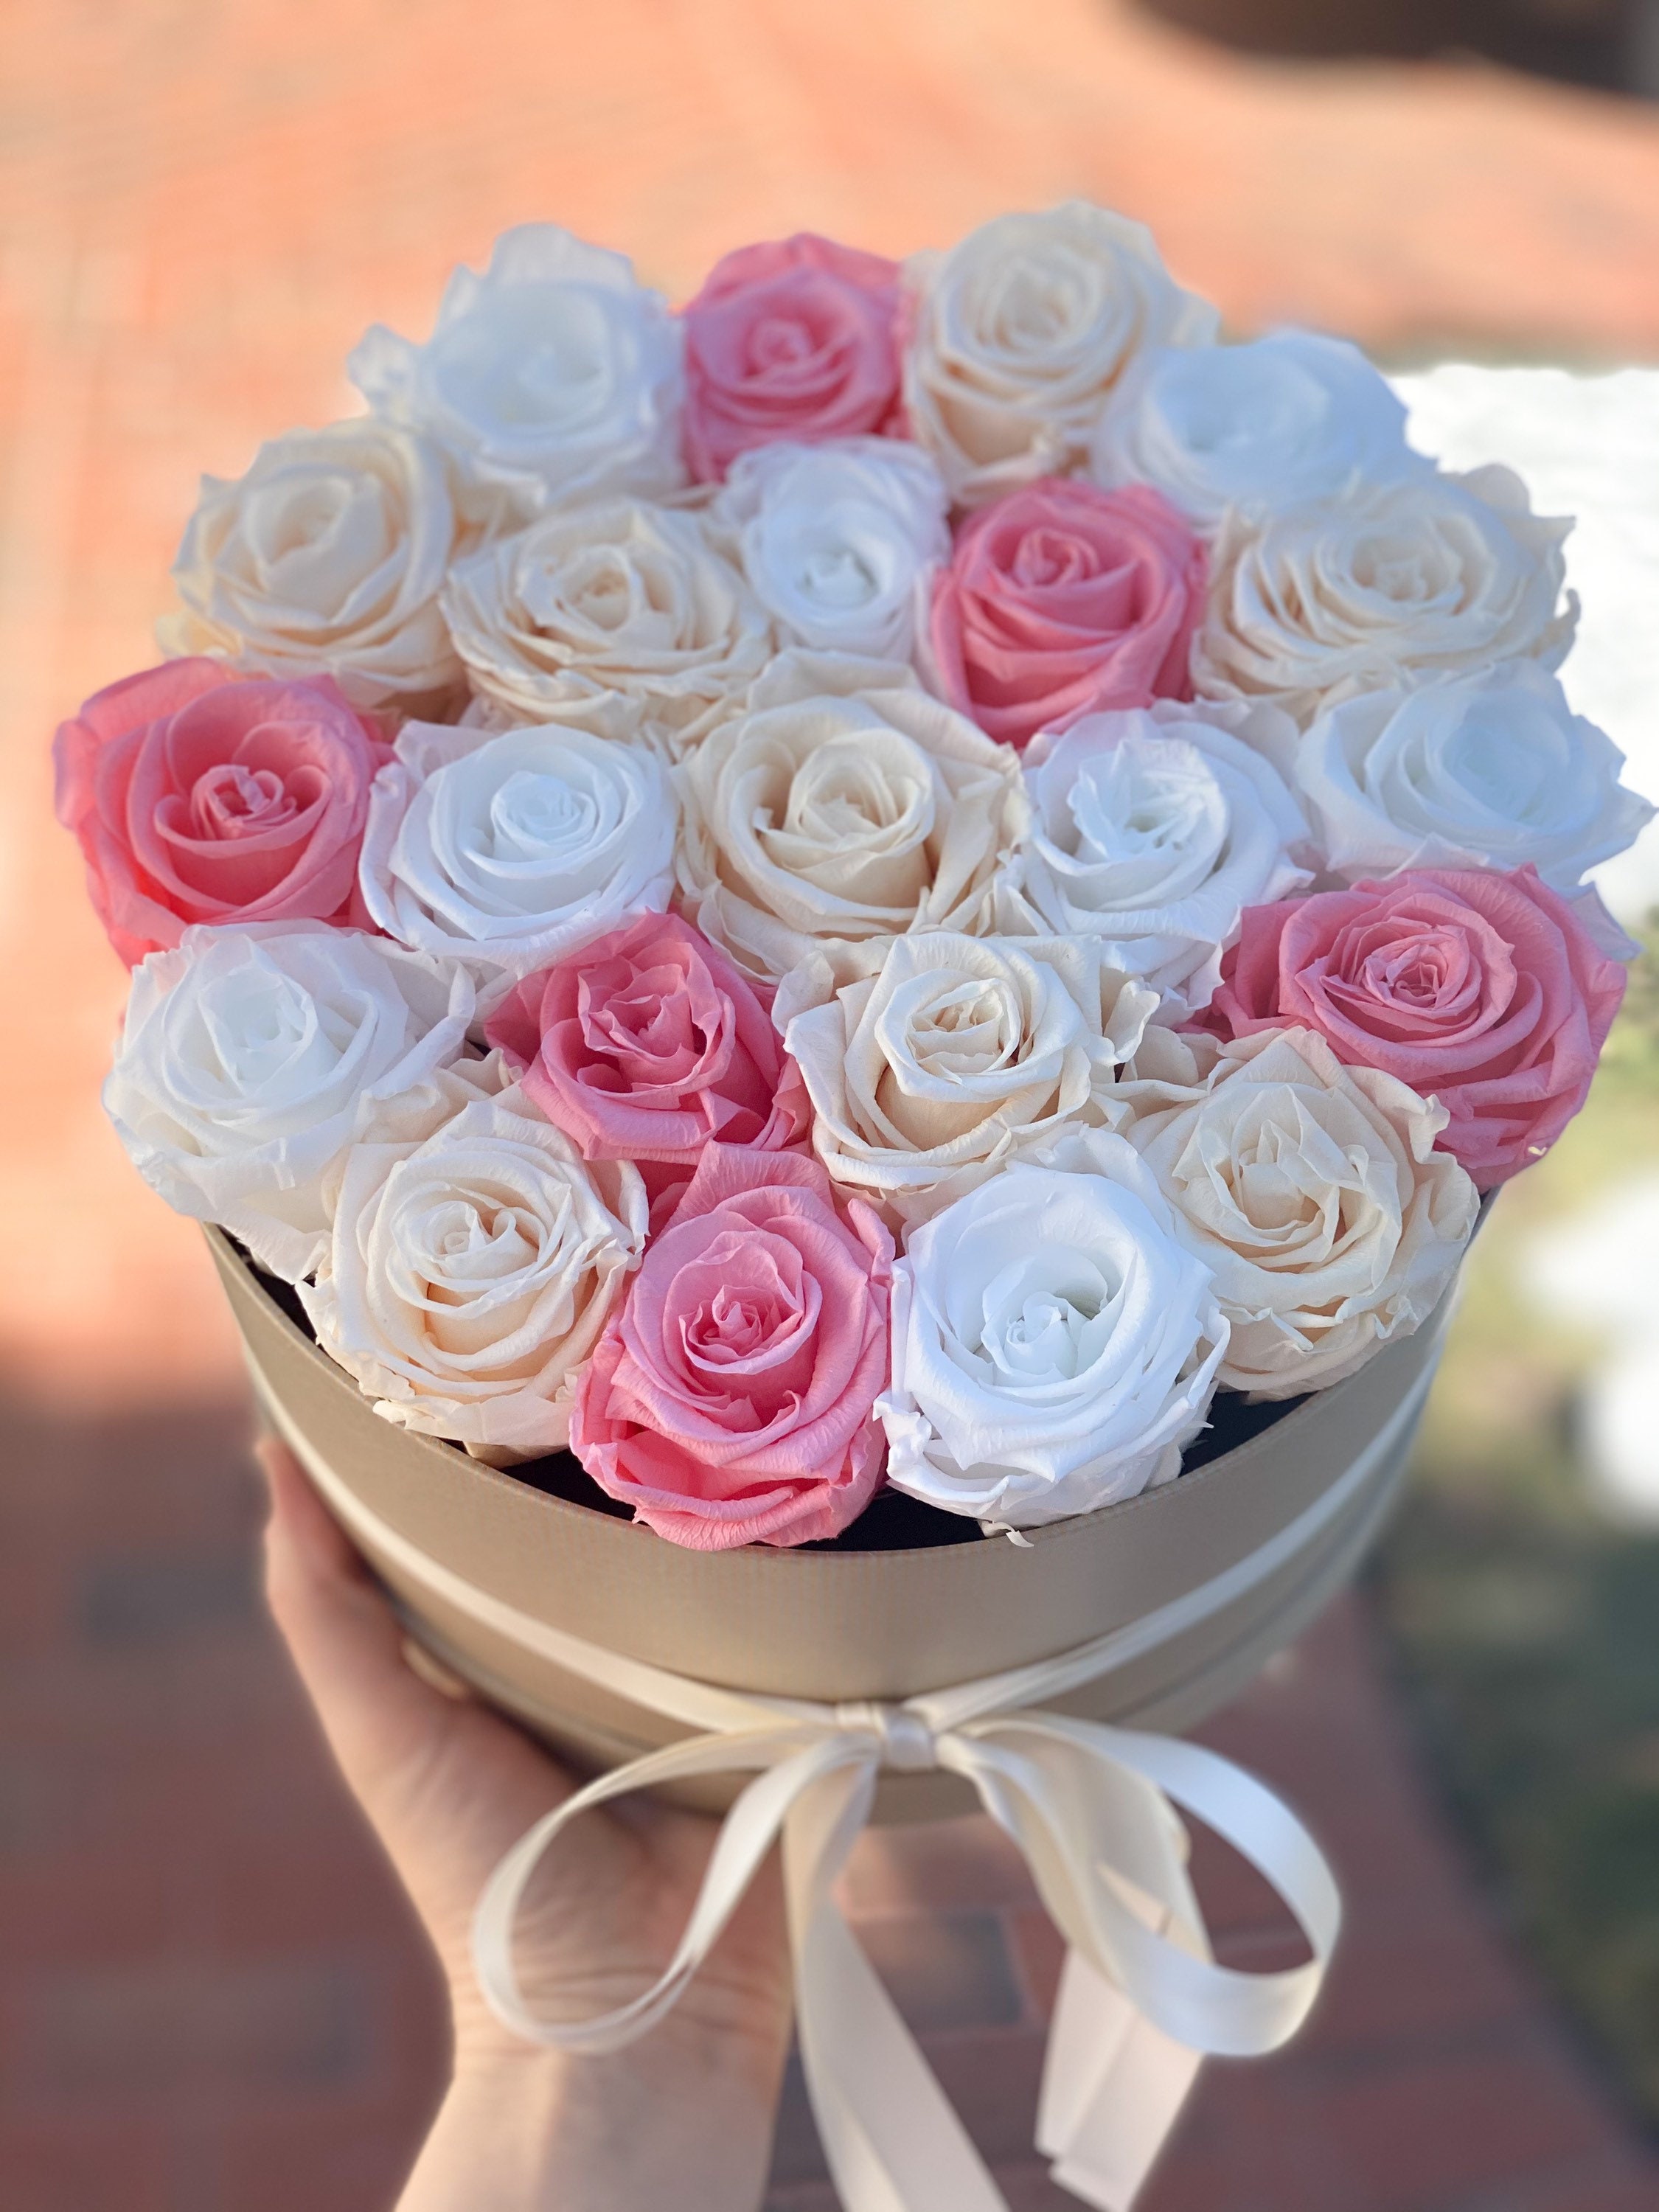 Enchanted Real Preserved Roses in a Heart Shaped Box, Fresh-Cut Eternity  Flowers that Last Years, Valentine's Day, Mother's Day Gifts for Her,  Luxury